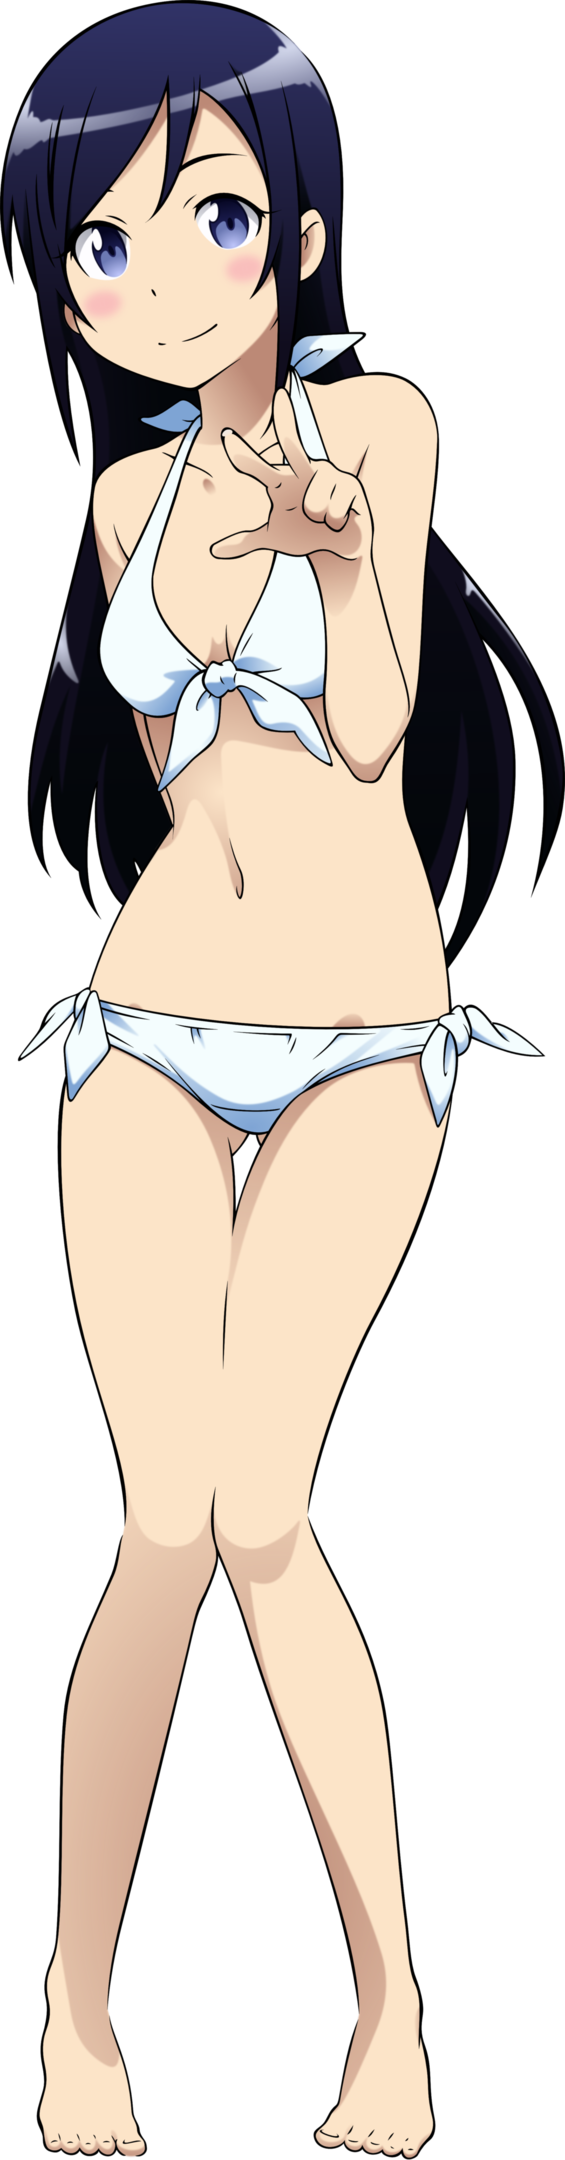 ayase_vector_by_smlc-d58p3wc.png